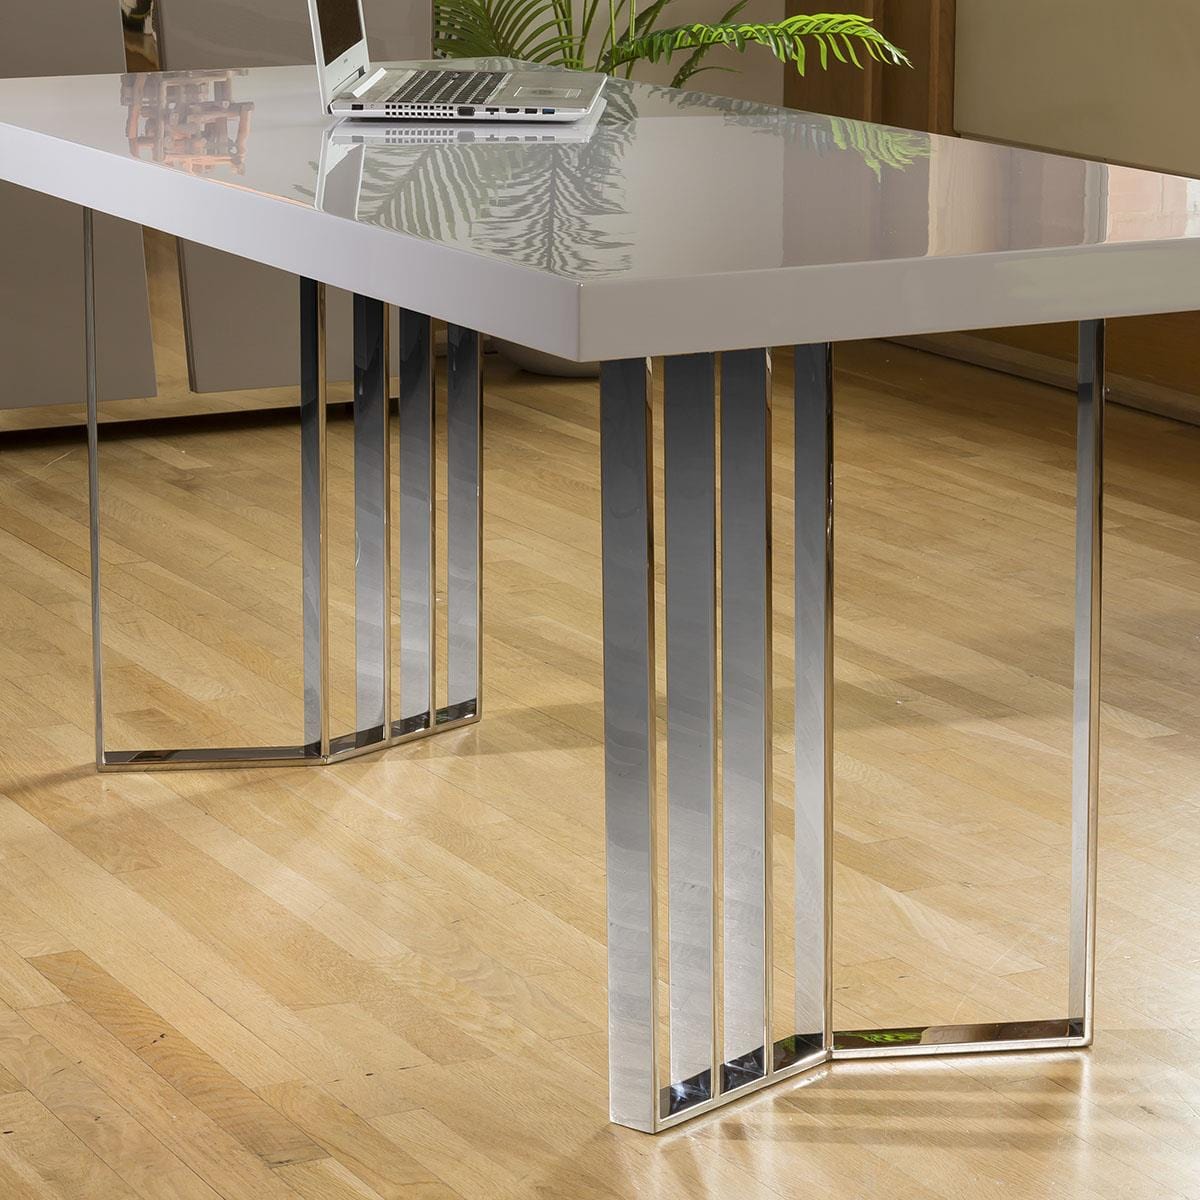 Quatropi 2 Desk arrangement in a grey gloss and stainless finish with chest of drawers